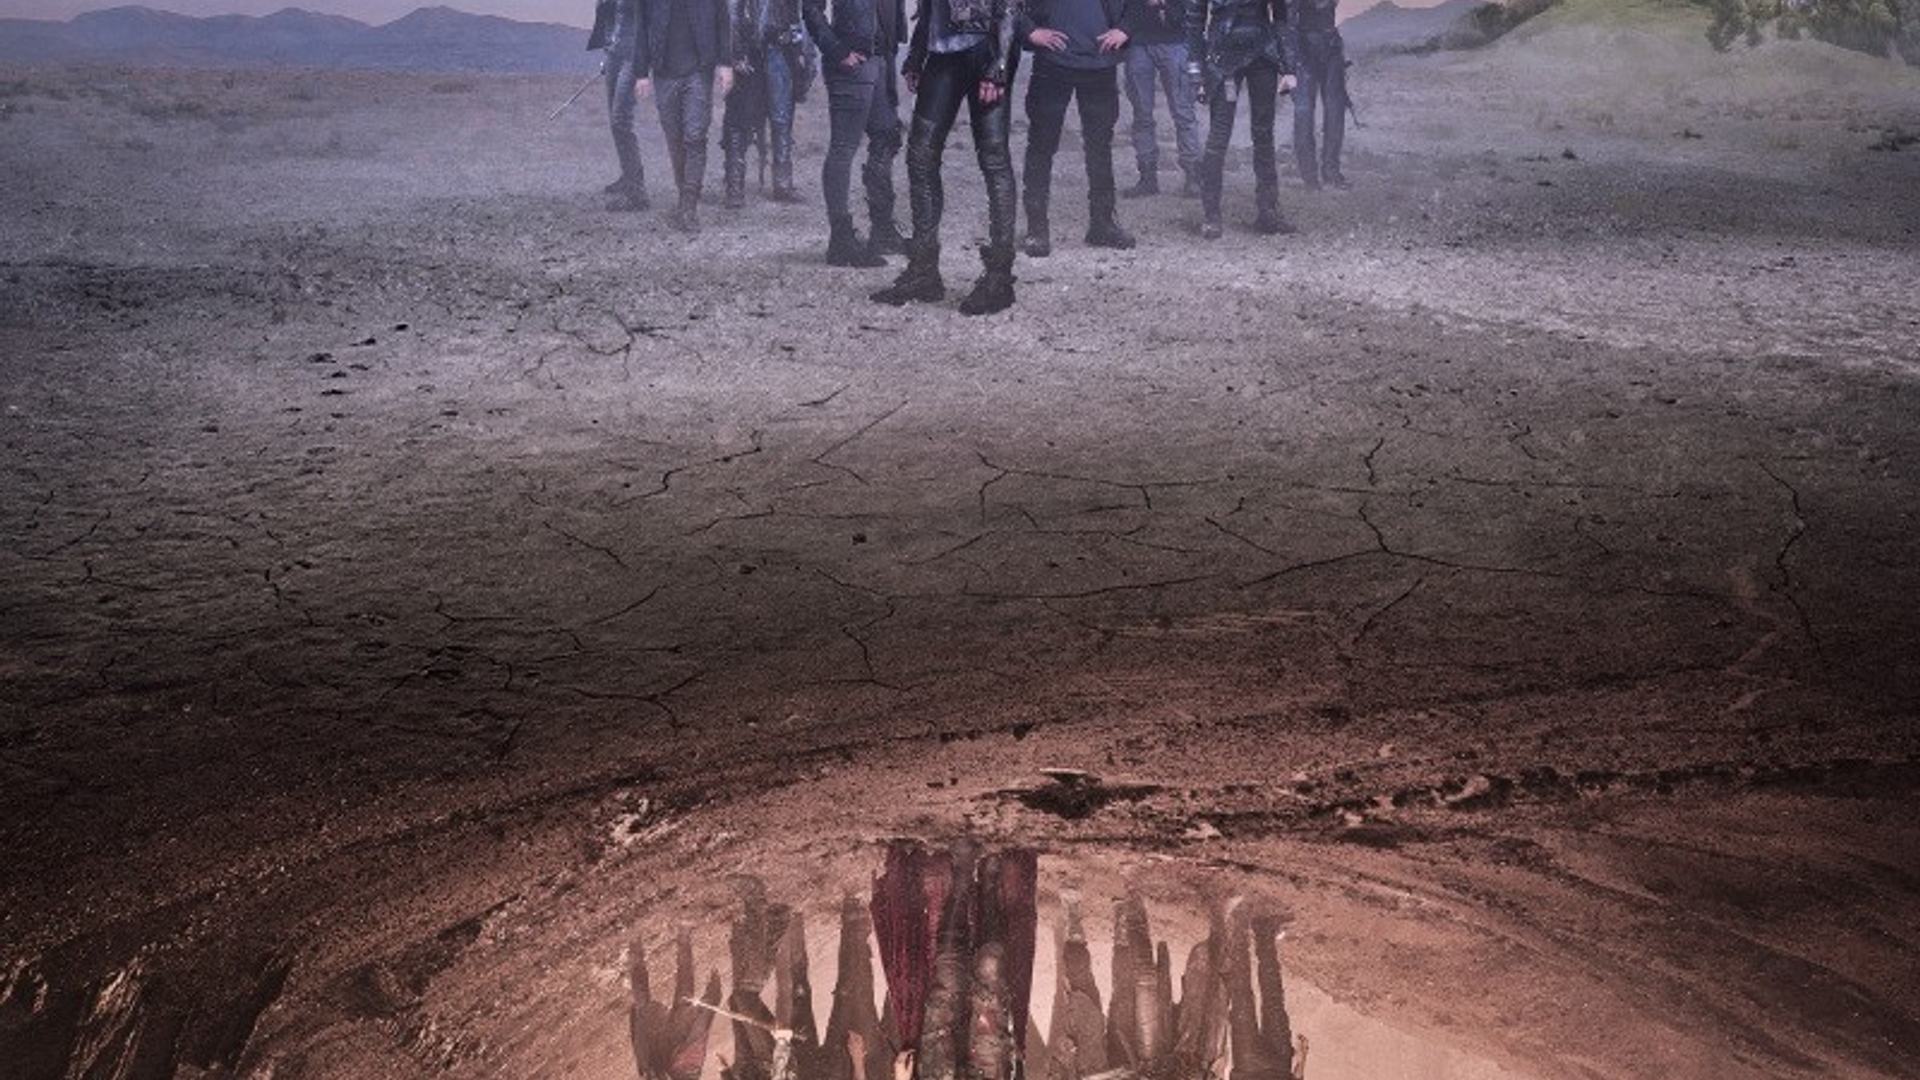 The 100 S5 poster